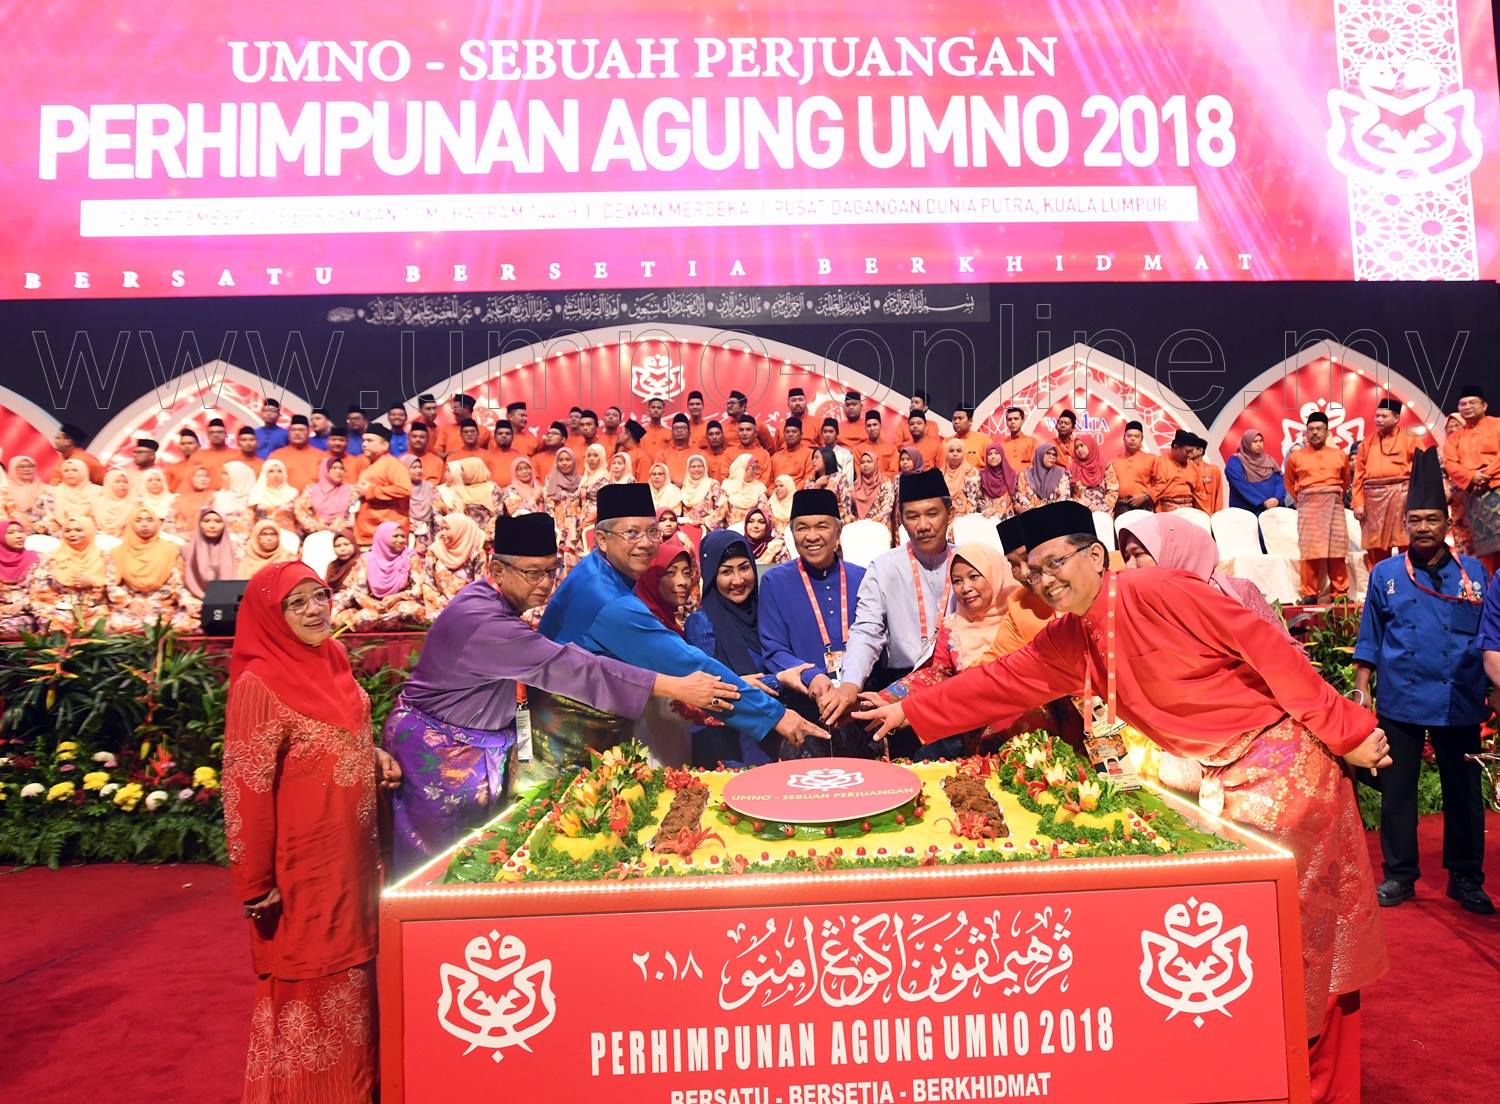 UMNO leaders proving that you can indeed have your cake and eat it too. Image from UMNO Online's FB